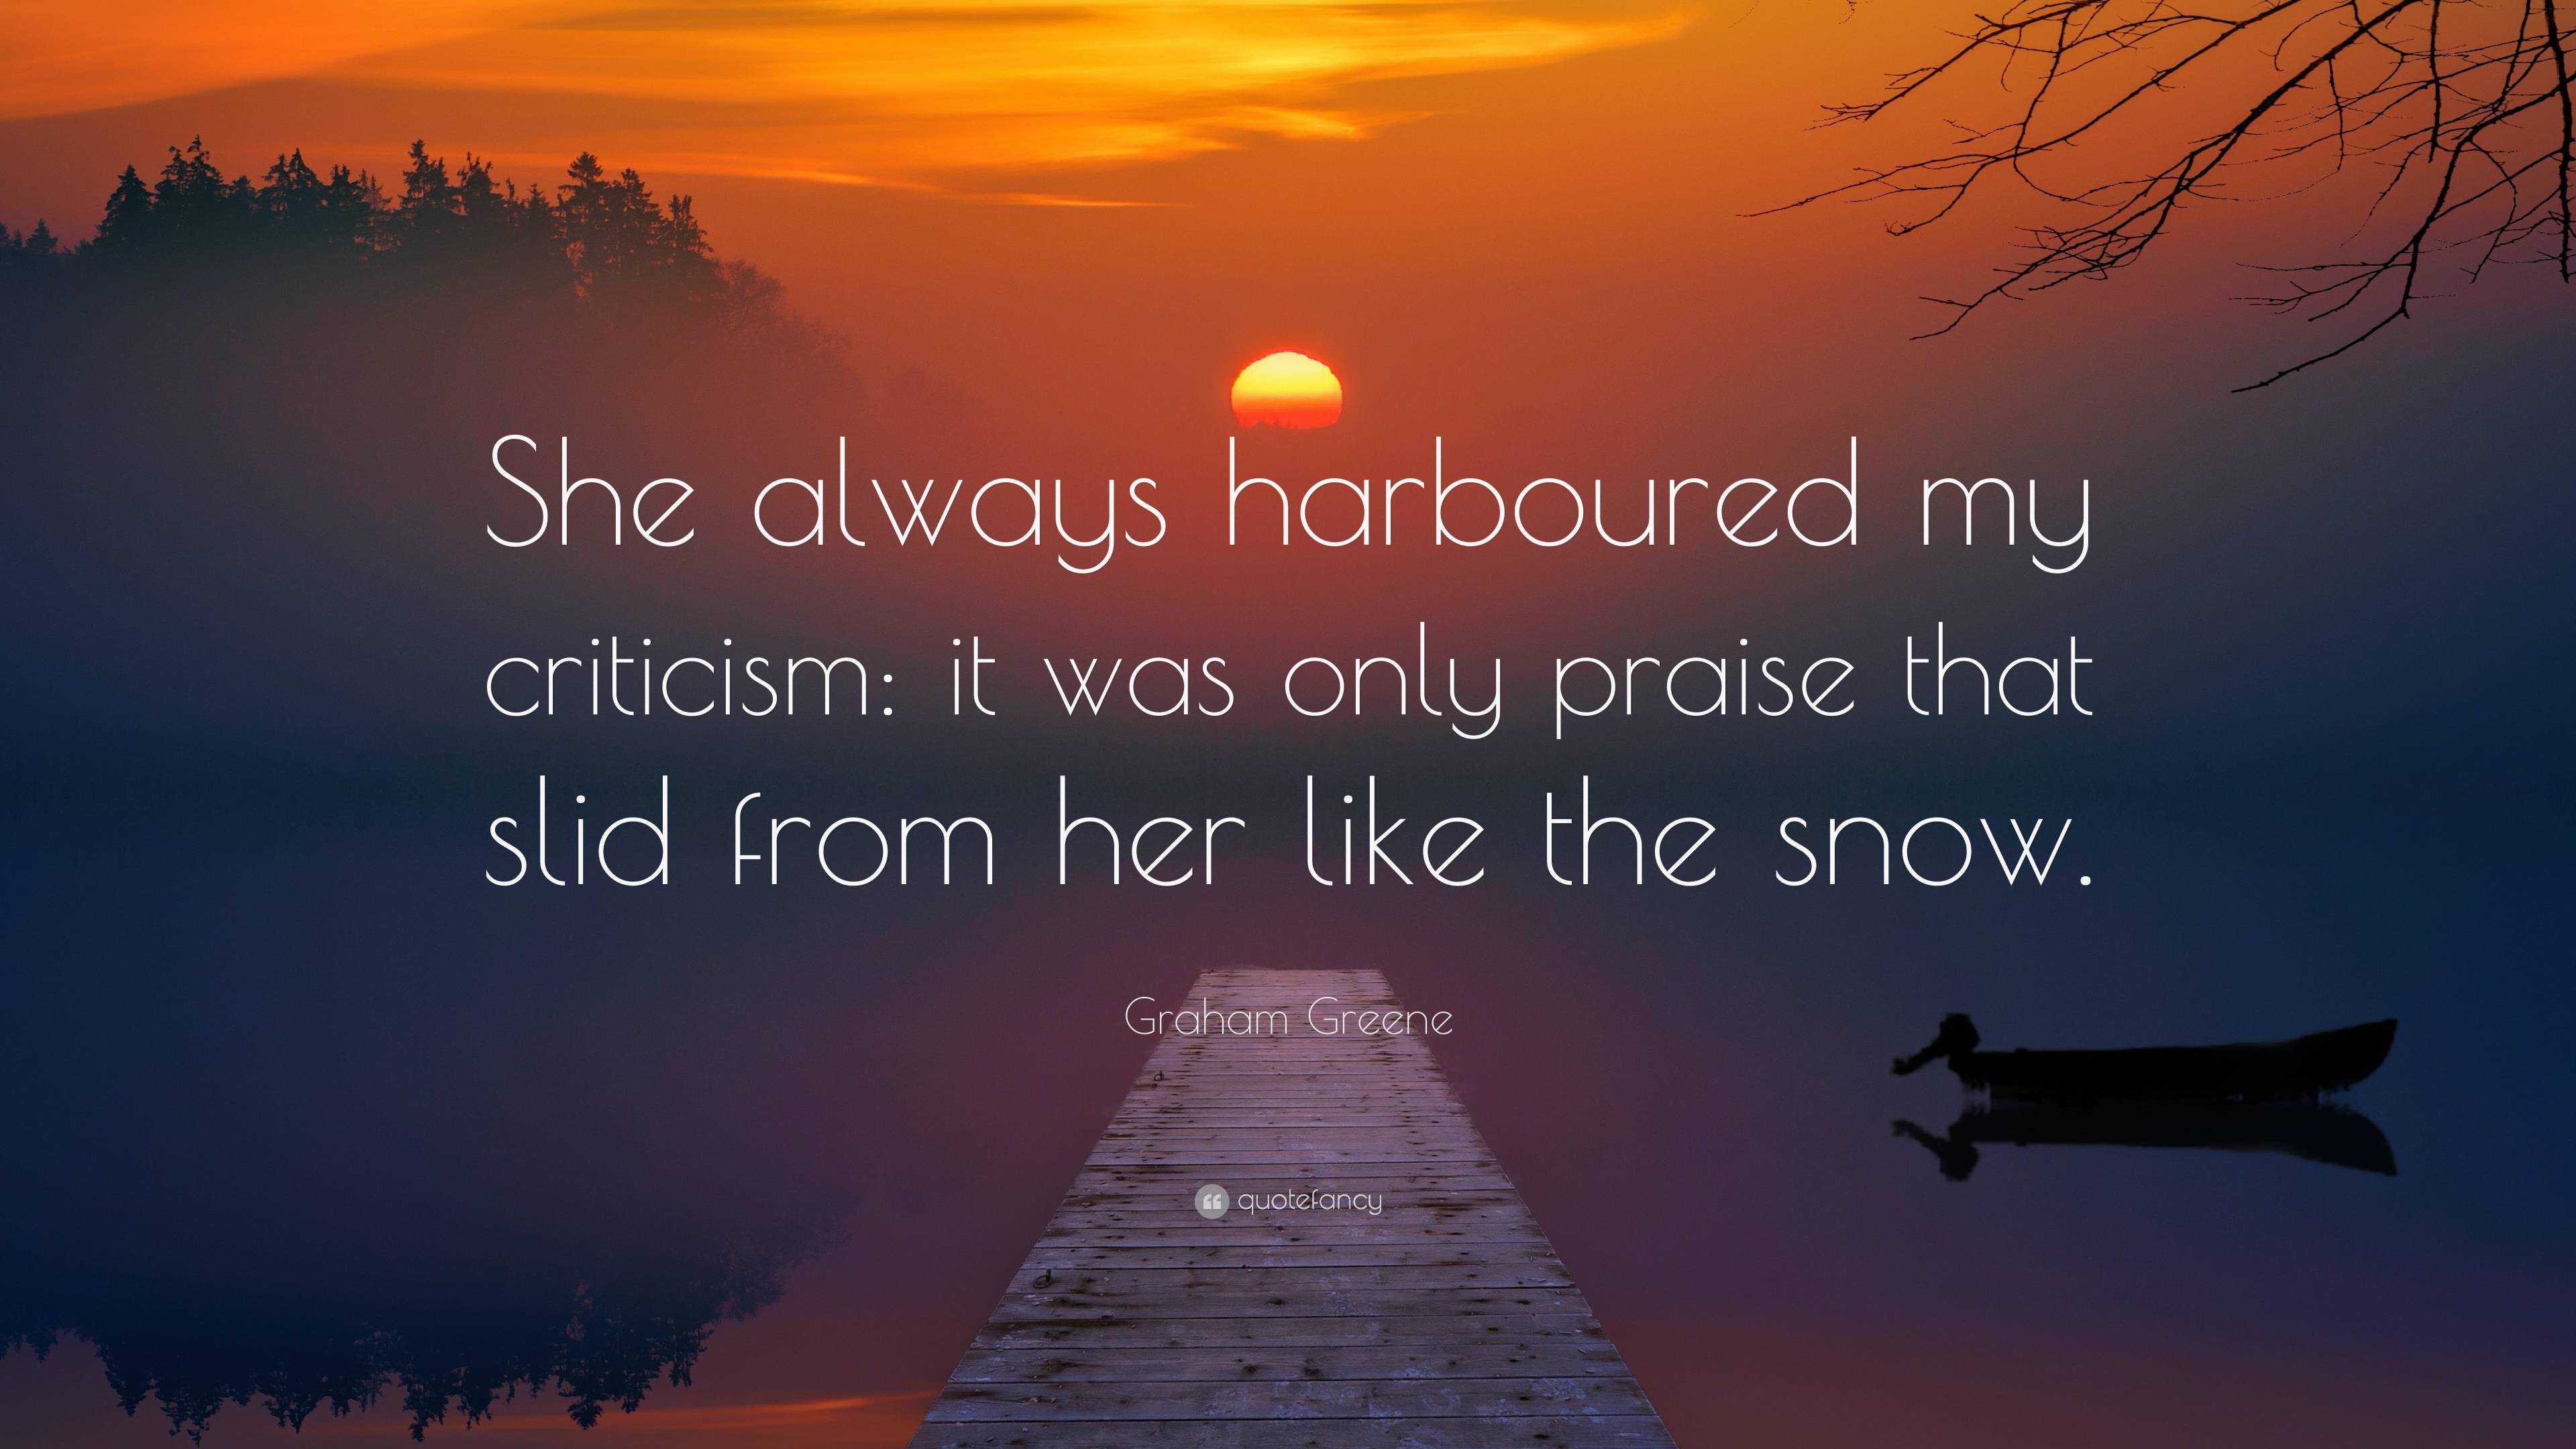 Graham Greene Quote: “She always harboured my criticism: it was only ...